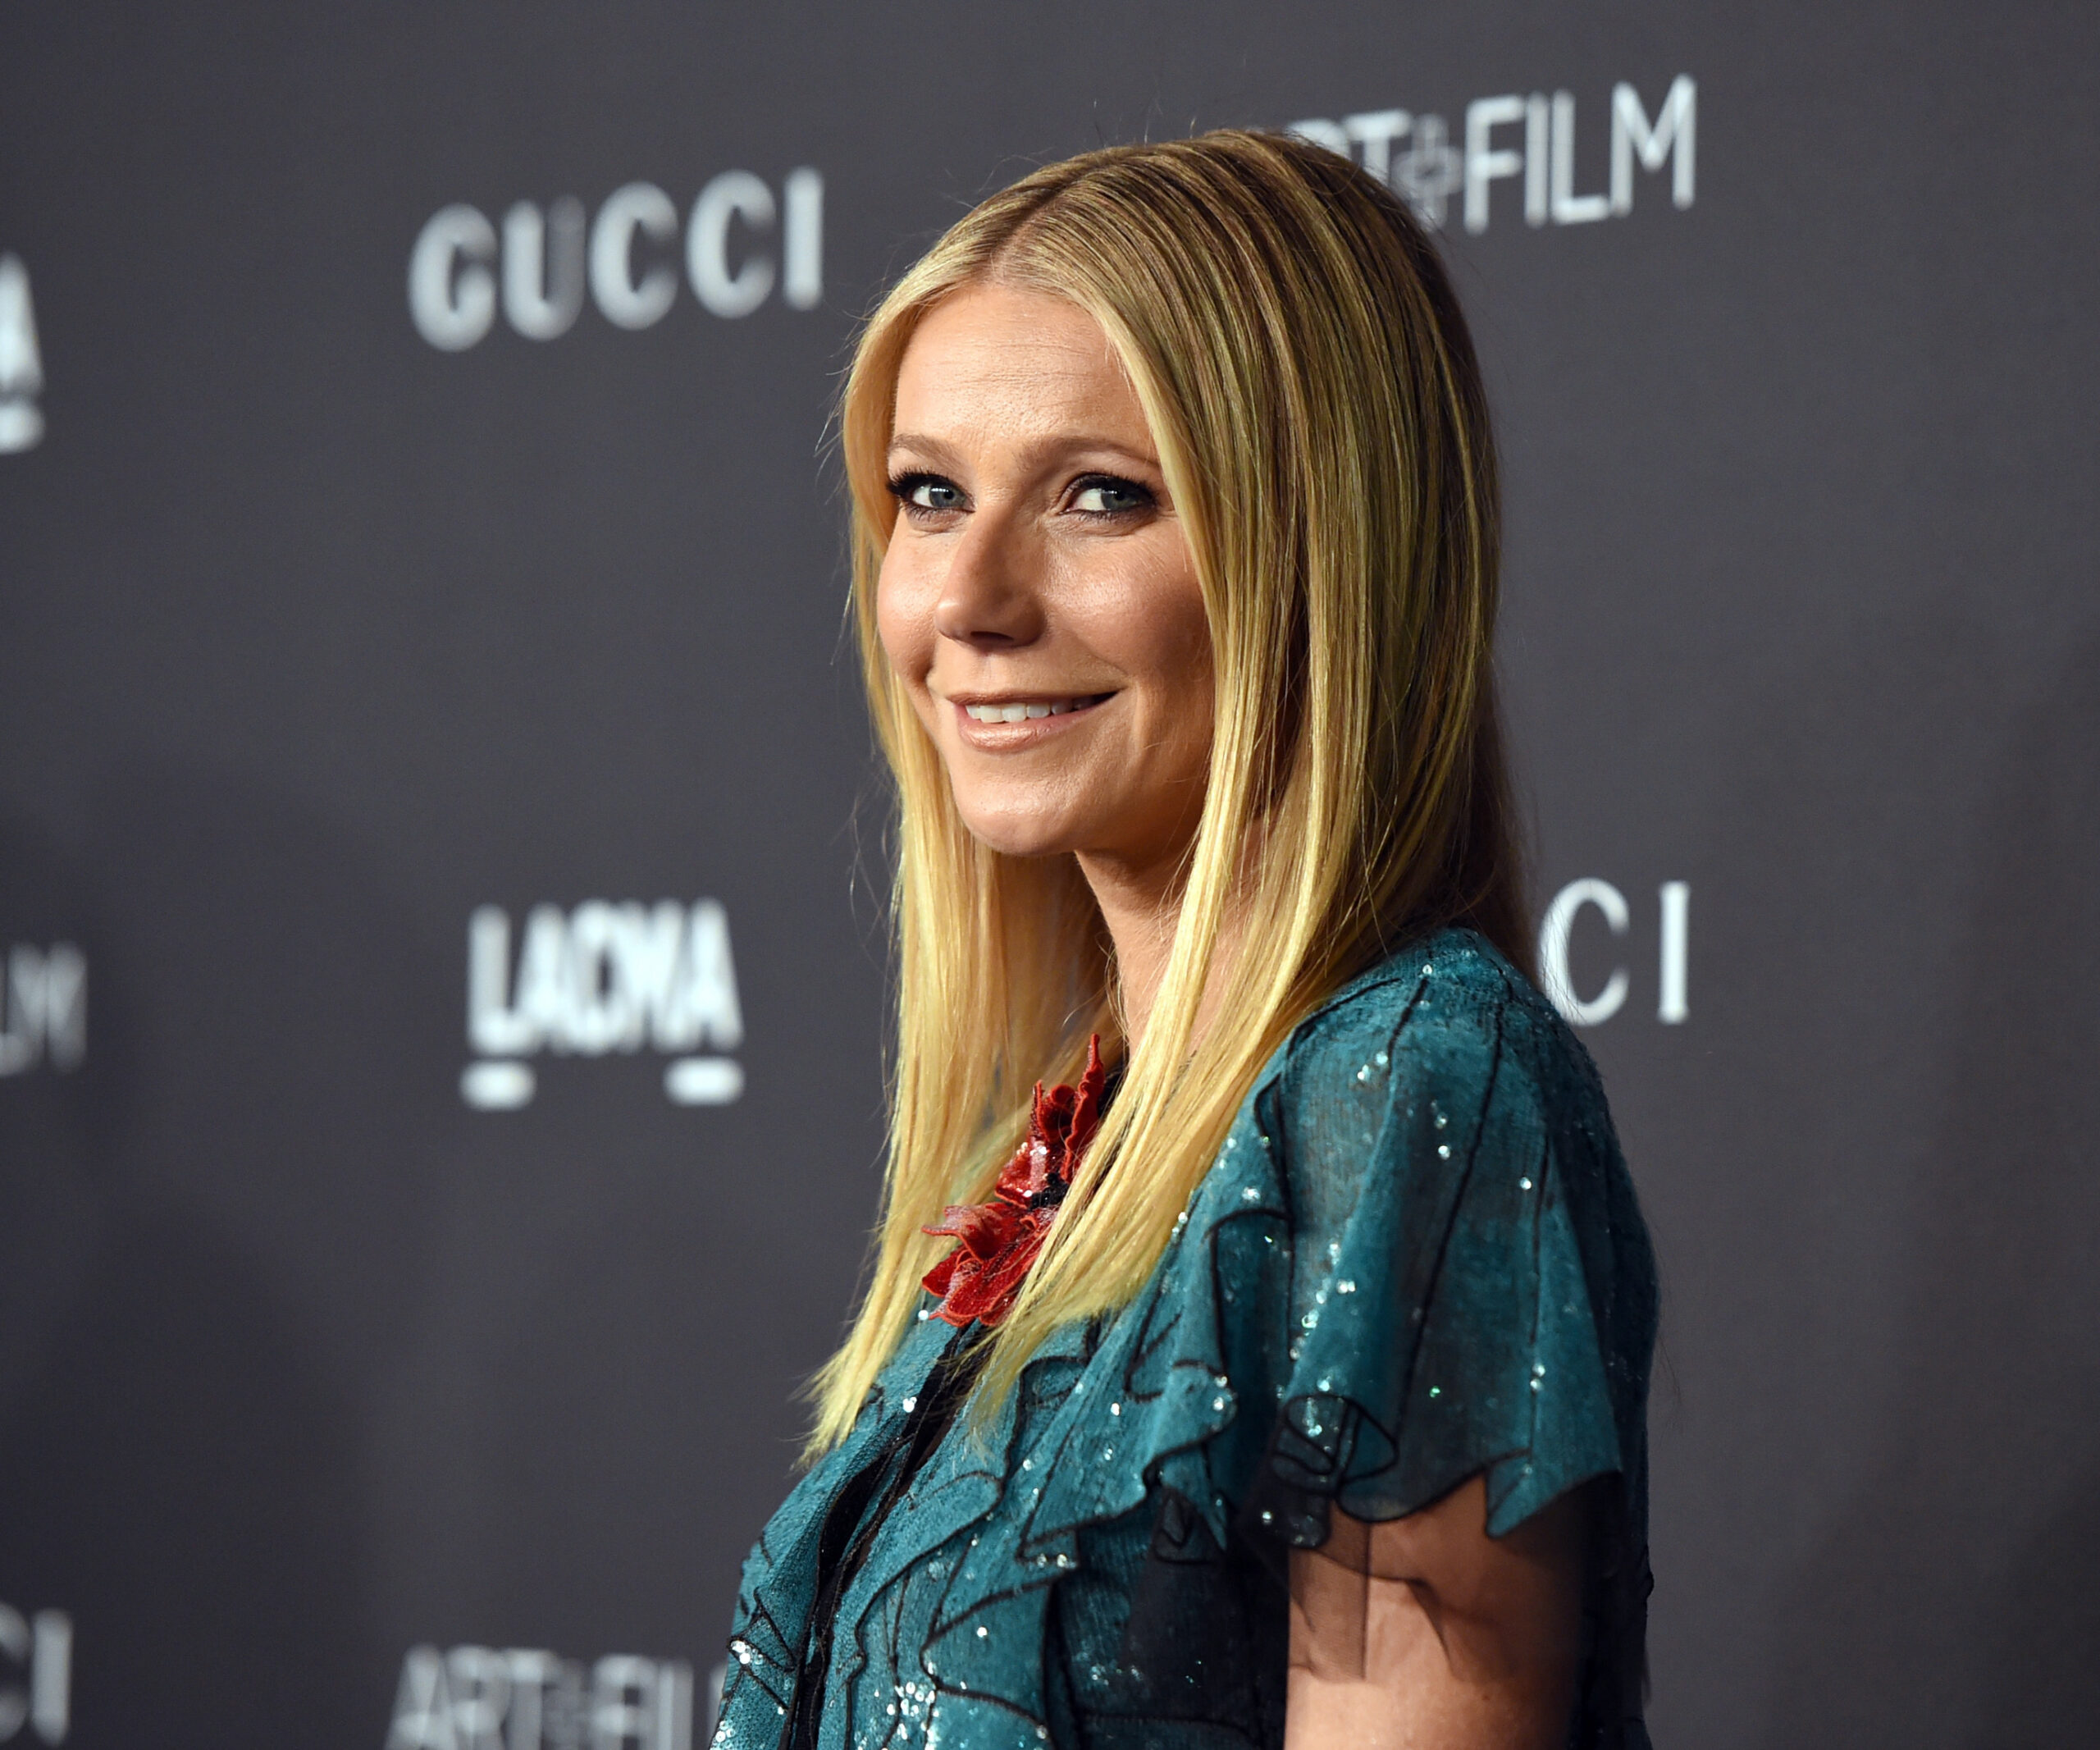 Gwyneth Paltrow fears for her children’s safety